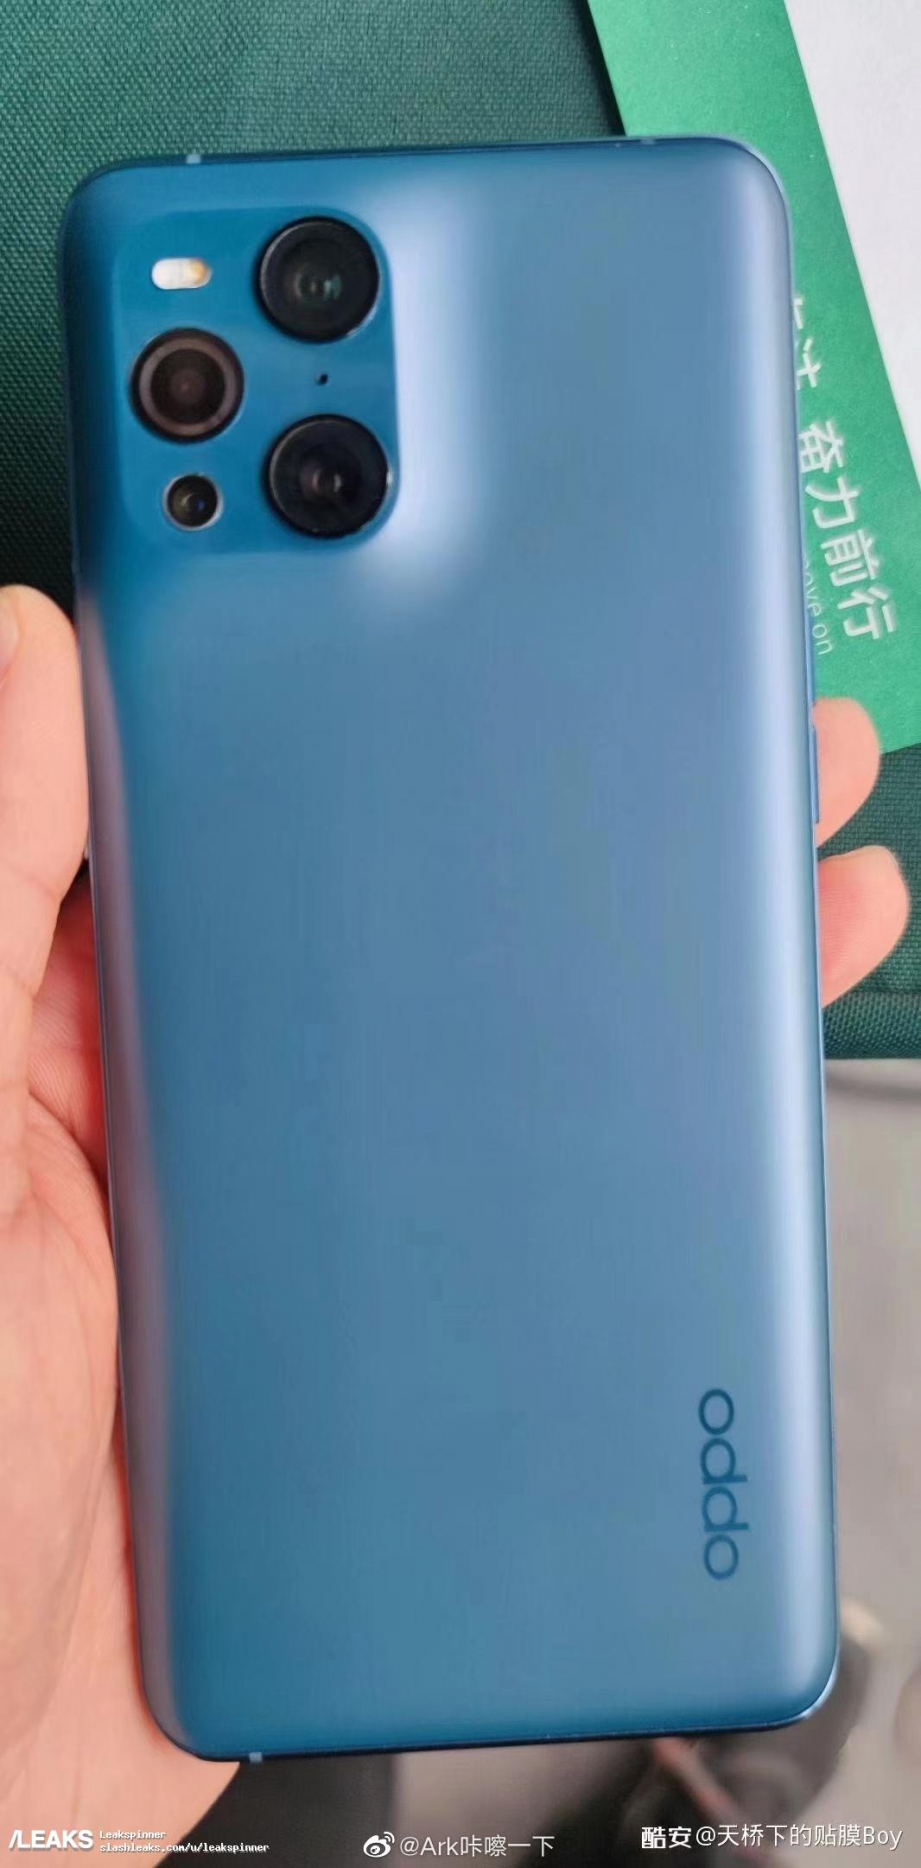 oppo-find-x3-picture-and-hands-on-video-leaks-out.jpg